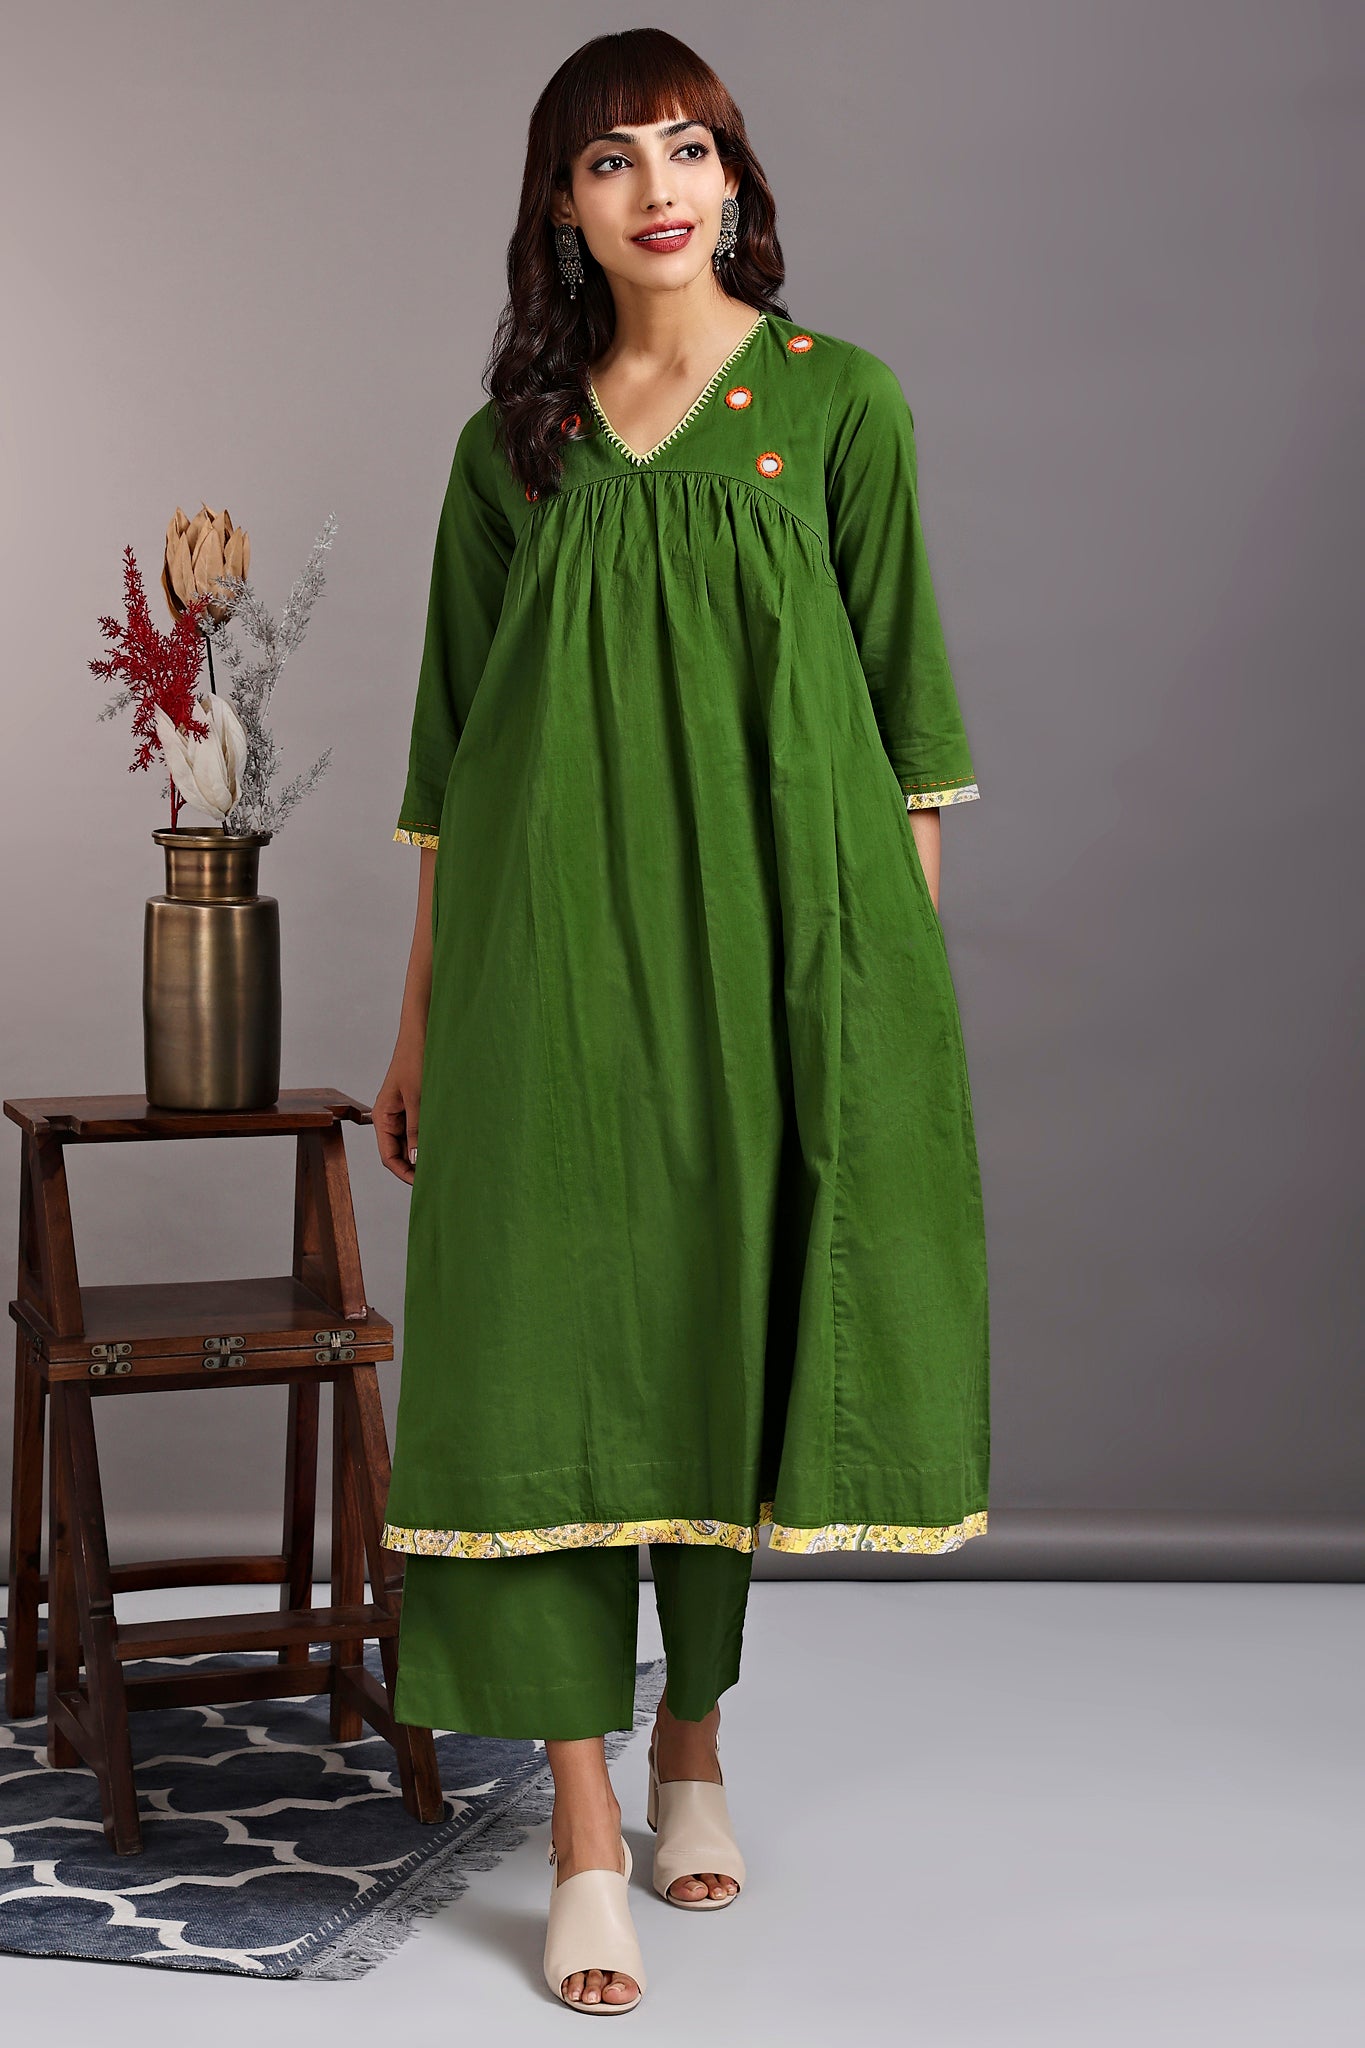 Herbs Green Floral Printed Summer Cotton Dress with Embroidery, Dresses, Green